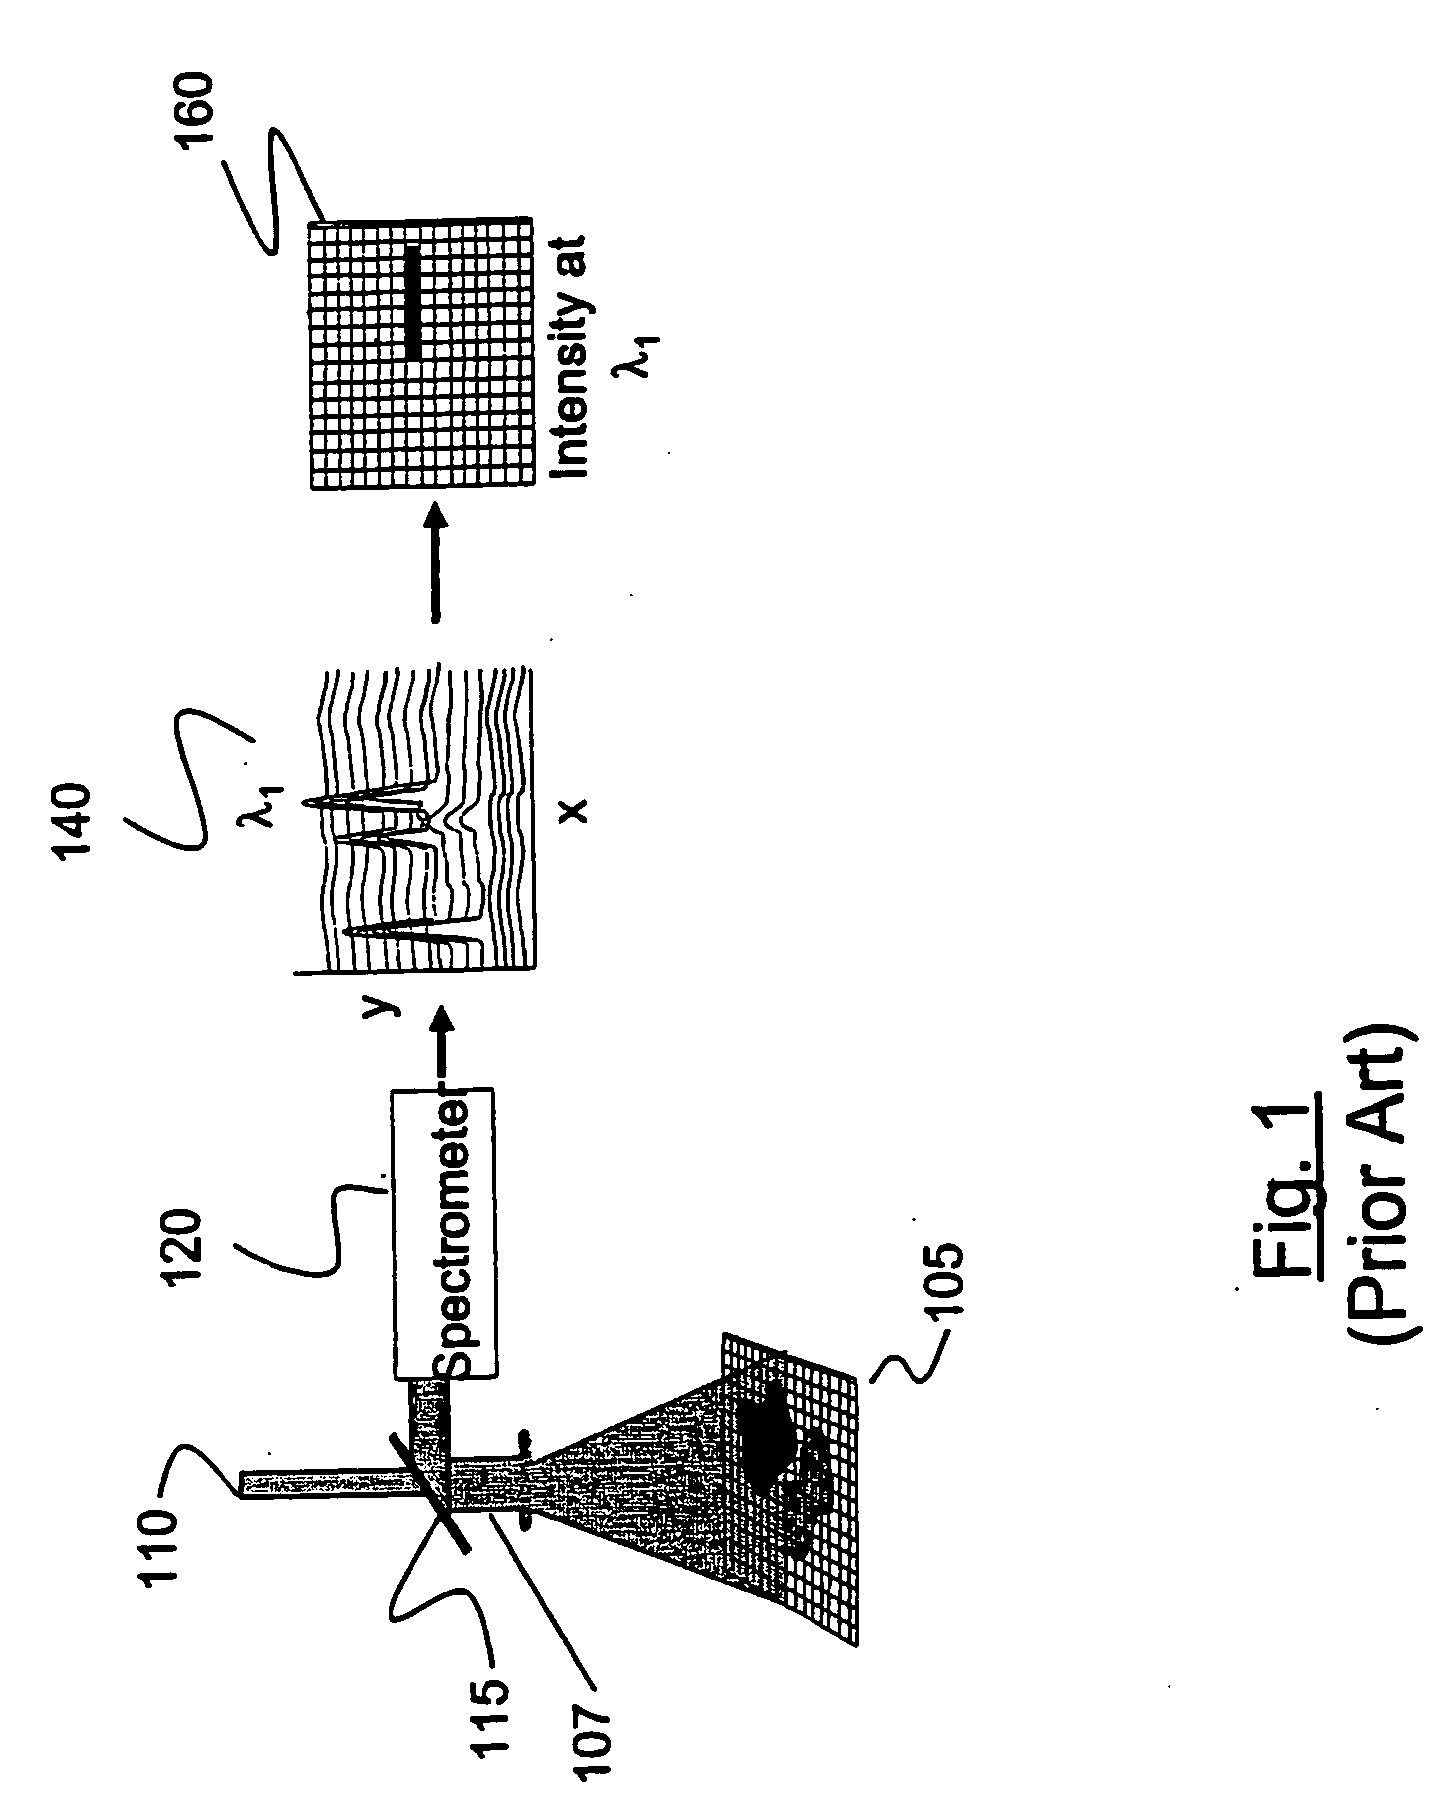 Sample container and system for a handheld spectrometer and method for using therefor